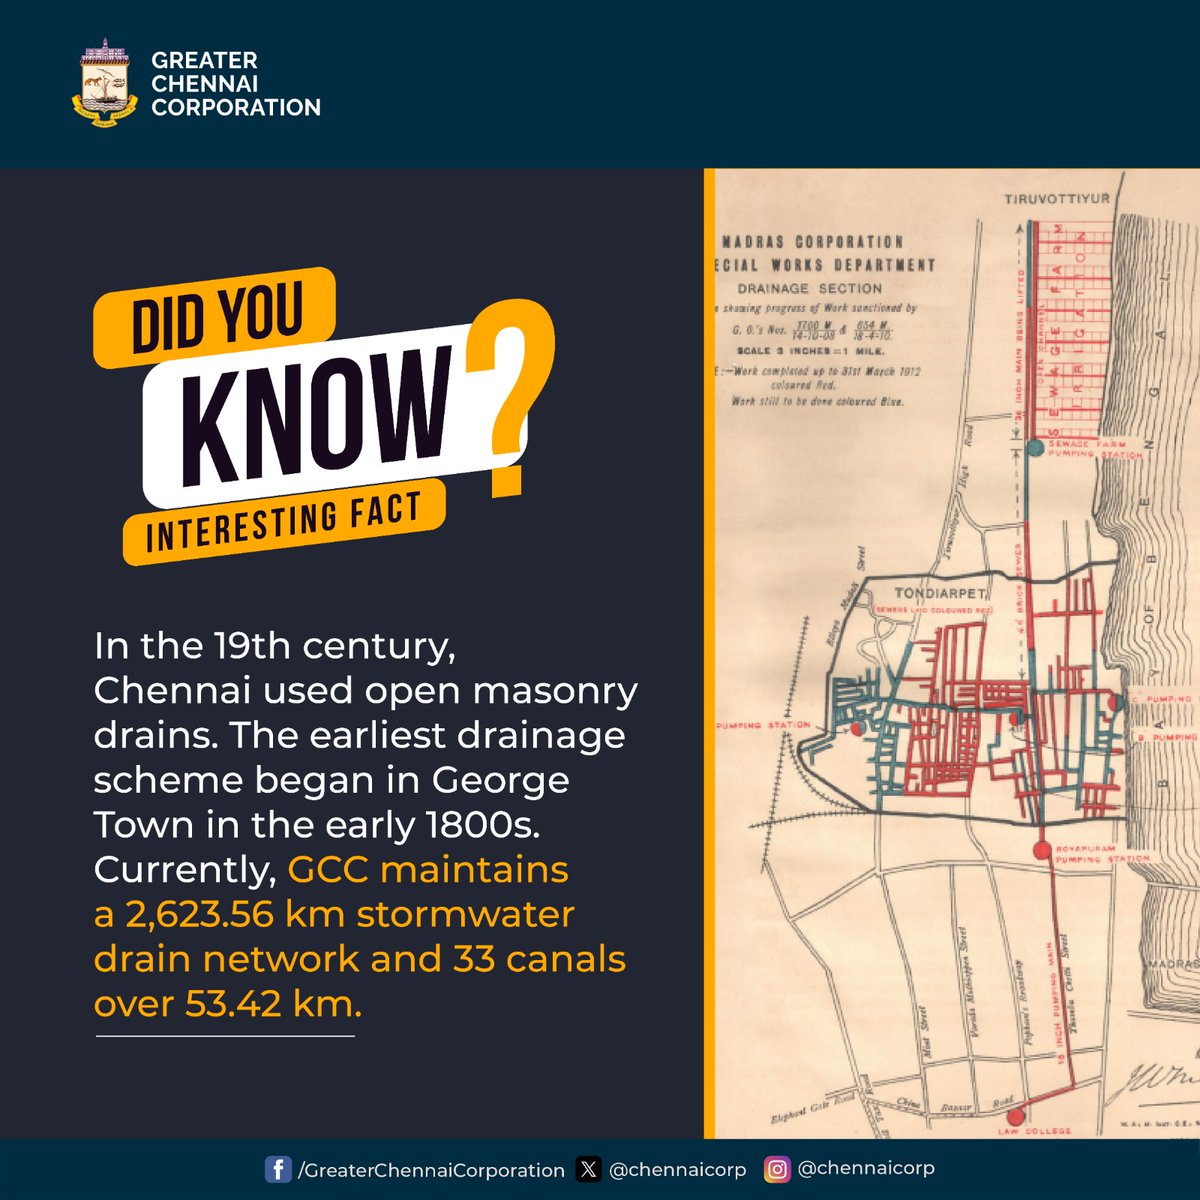 In the 19th century, densely populated areas used open masonry drains. The earliest drainage scheme began in George Town in the early 1800s. Today, #GCC maintains a 2,623.56 km stormwater drain network with 11,516 structures and 33 canals spanning 53.42 km. #ChennaiCorporation